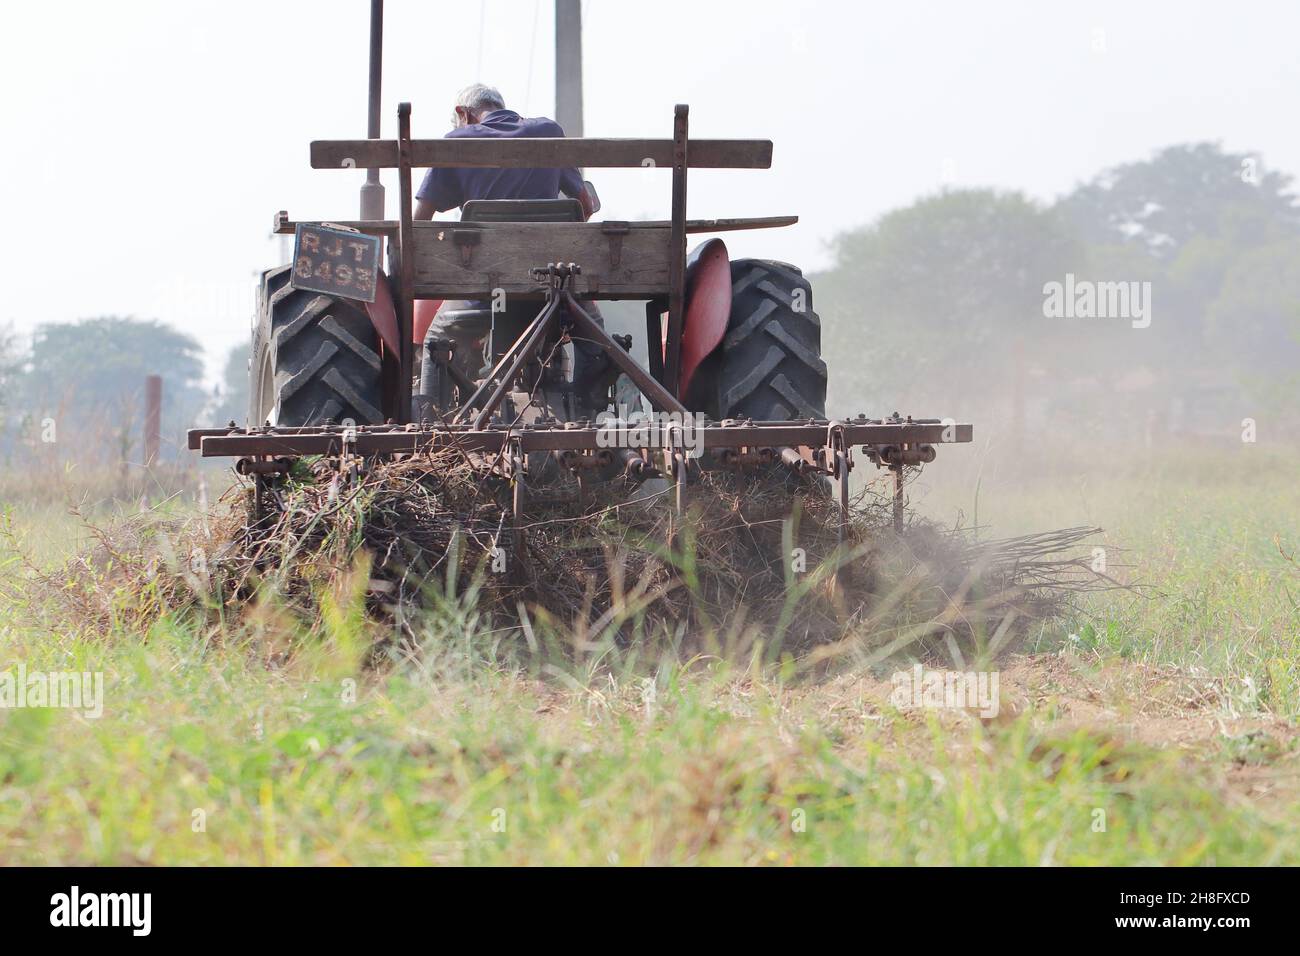 An Indian male laborer farmer plowing the field with the help of a tractor plow Stock Photo